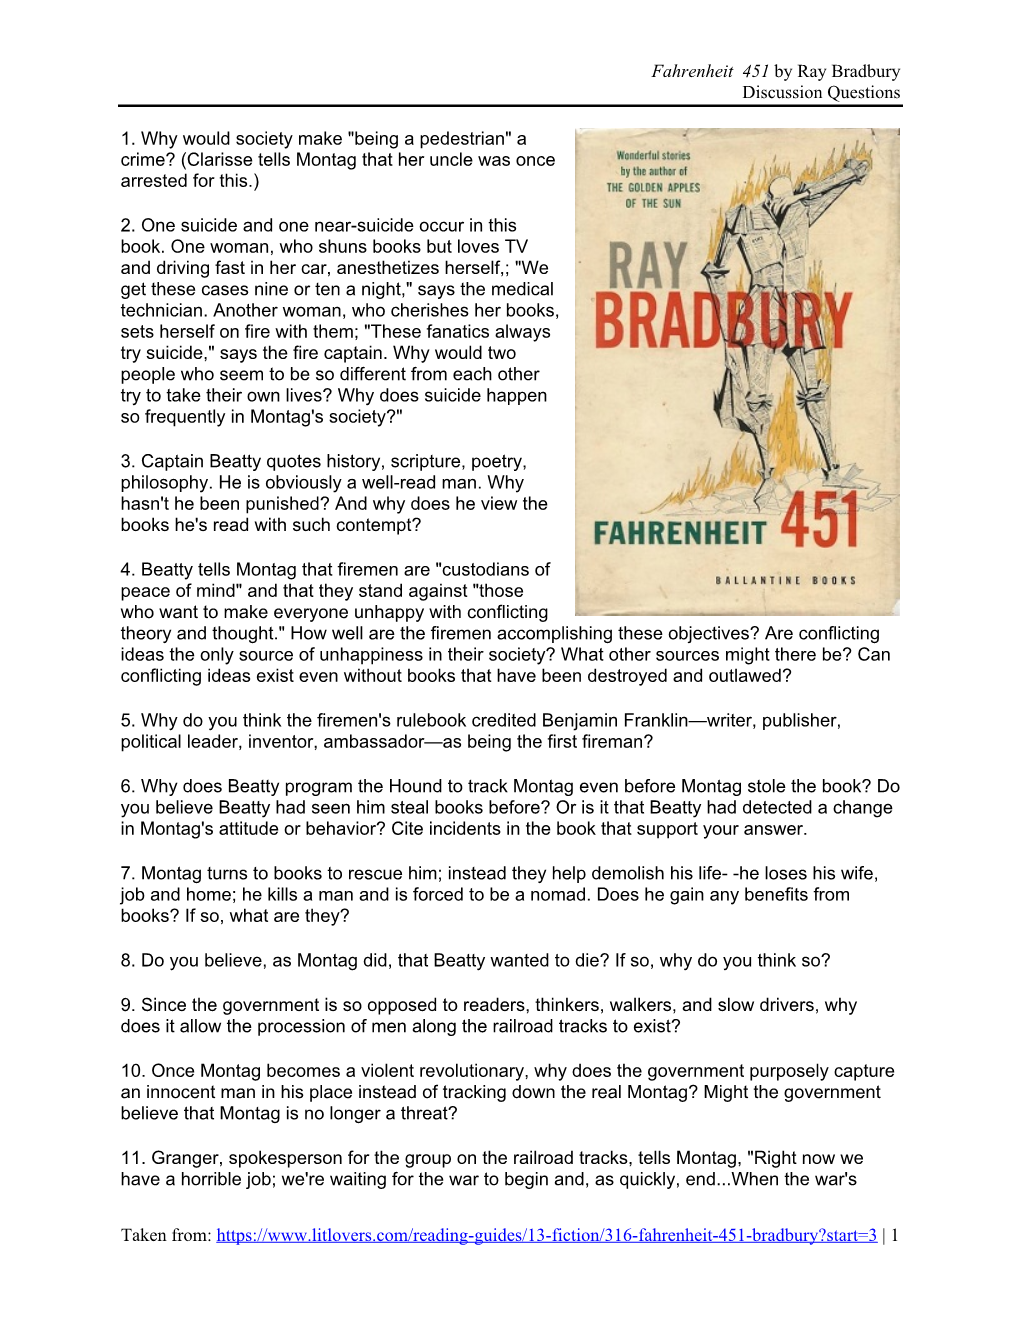 Fahrenheit 451 by Ray Bradbury Discussion Questions Taken From